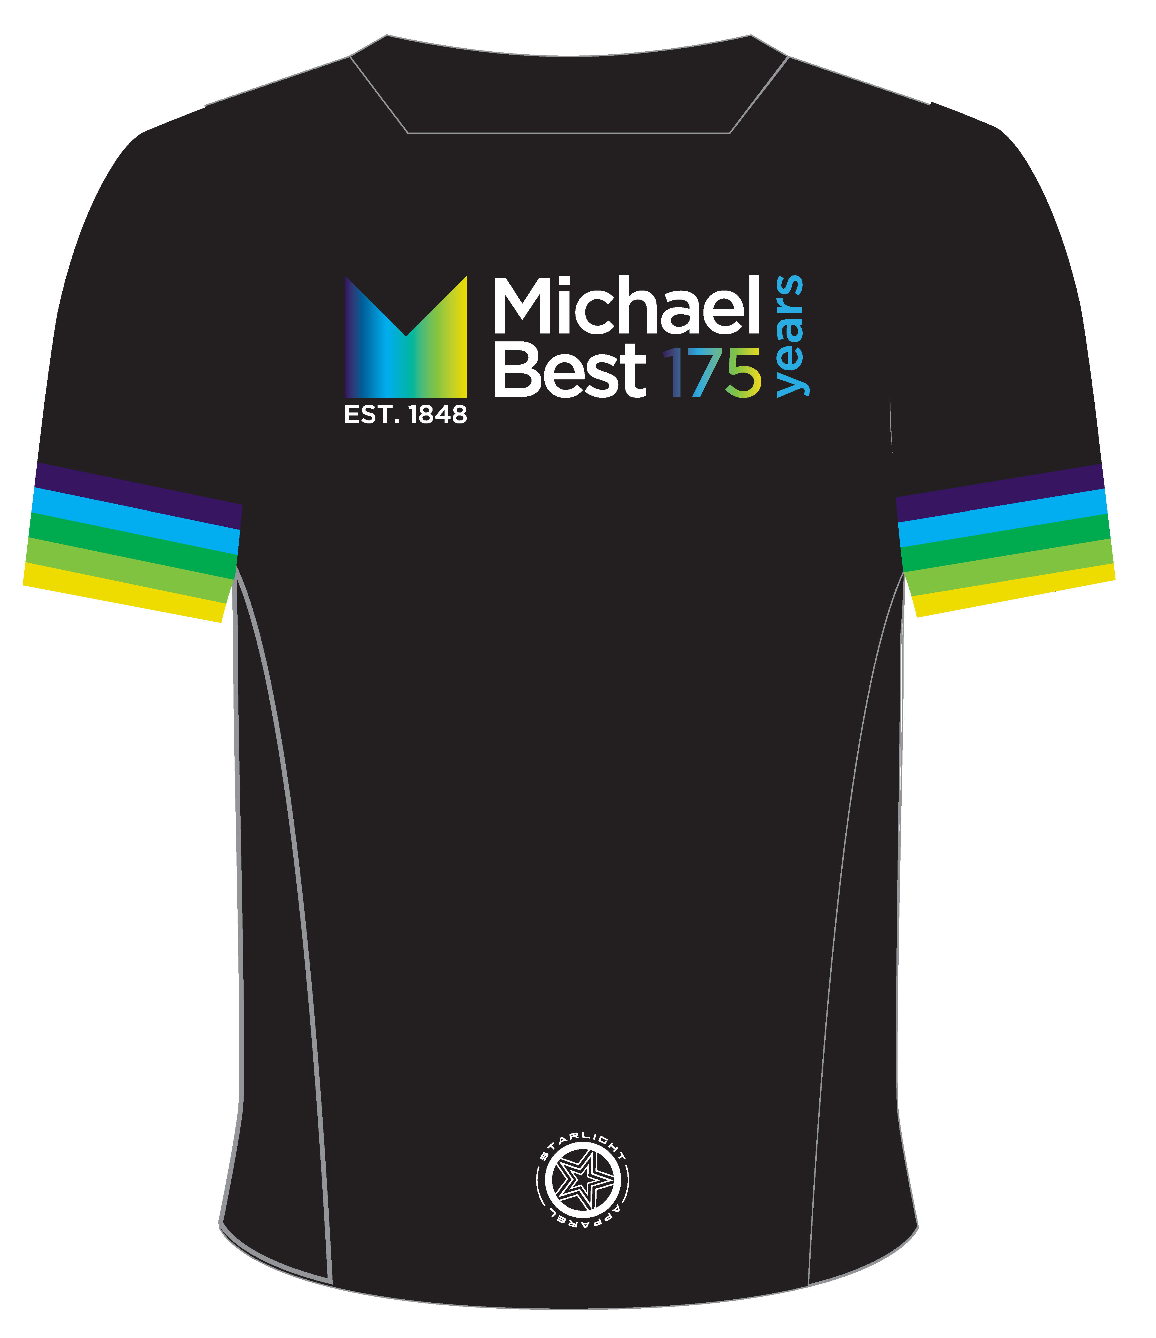 MBS Downhill Jersey